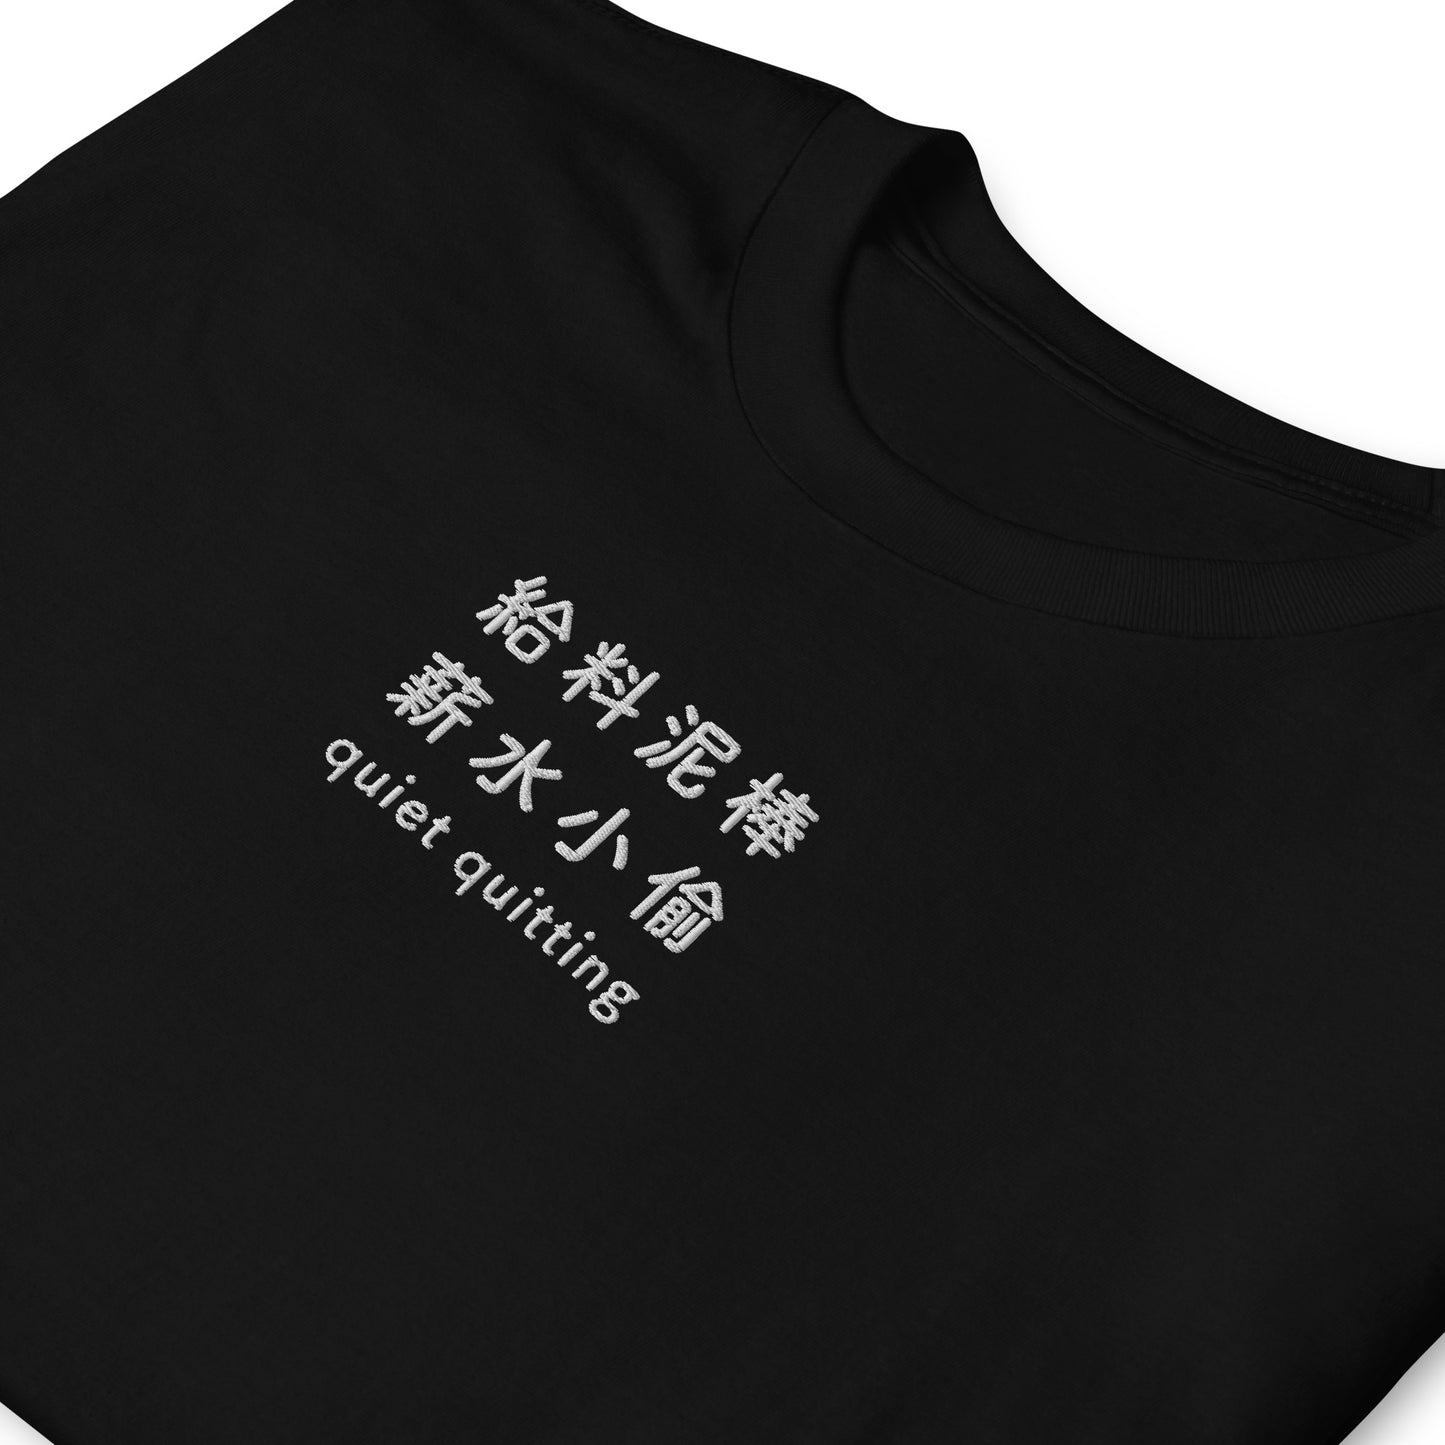 Black High Quality Tee - Front Design with an White Embroidery "Quiet Quitting" in Japanese,Chinese and English